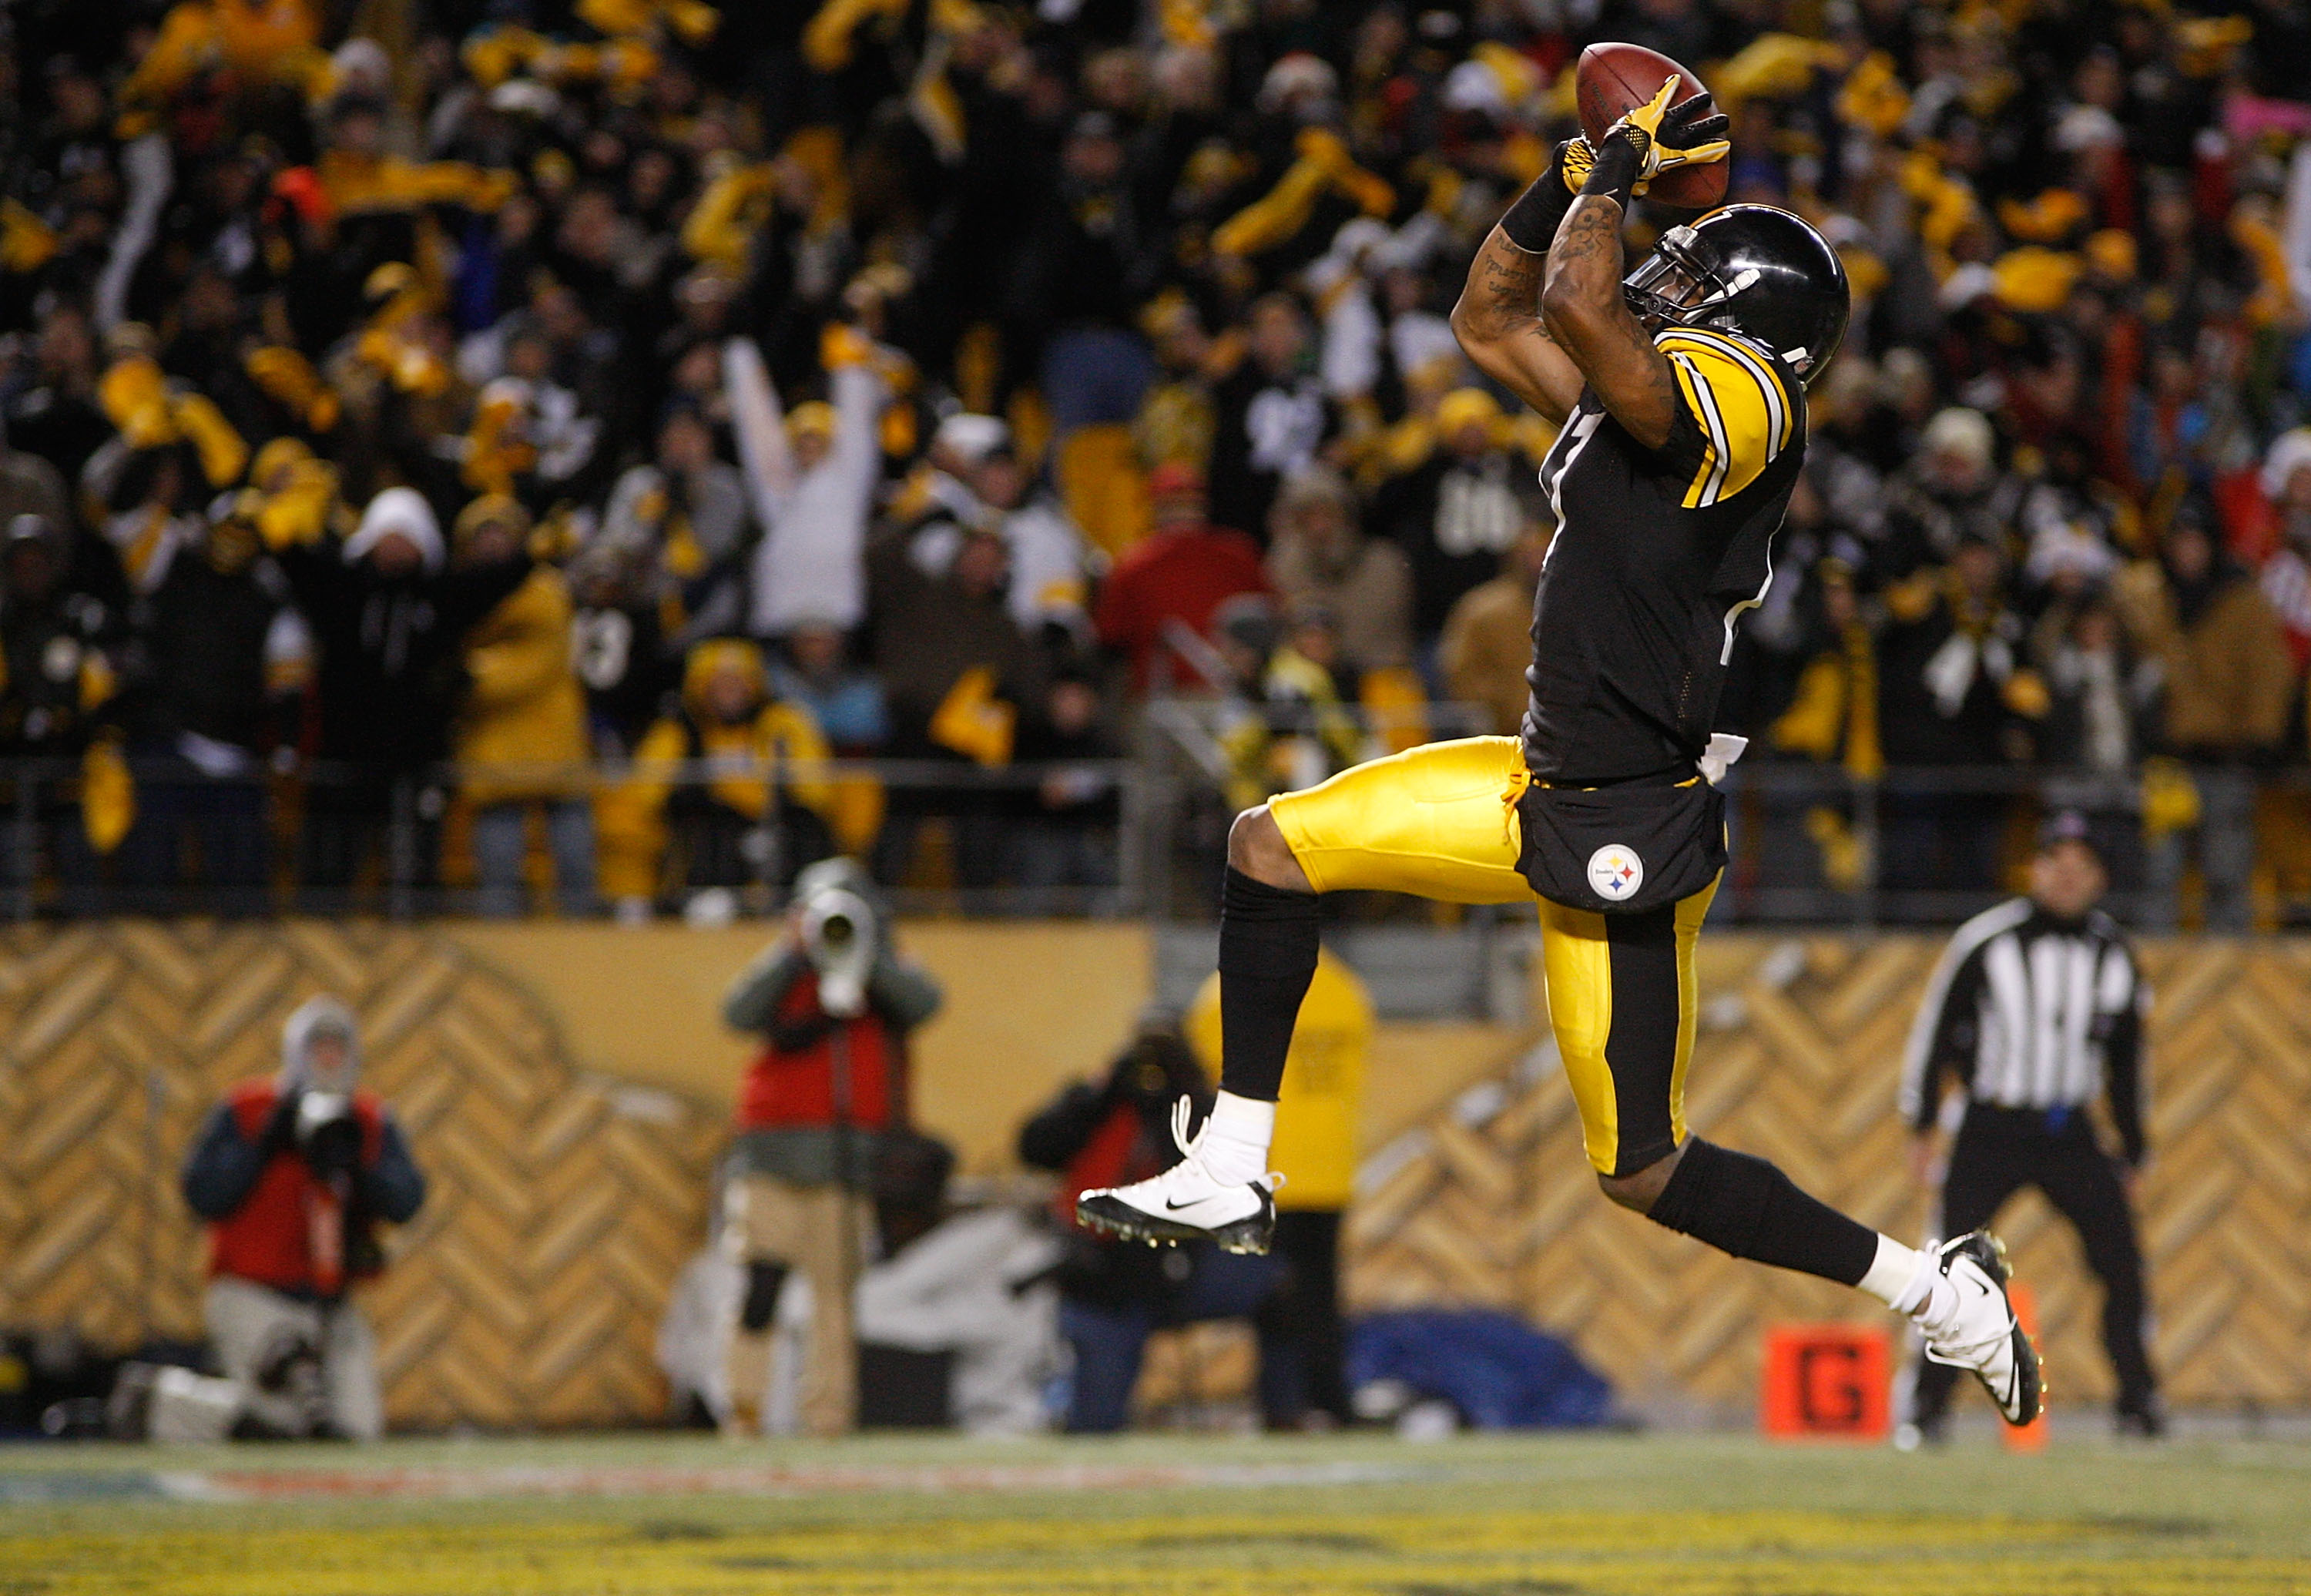 PITTSBURGH - DECEMBER 23:  Mike Wallace #17 of the Pittsburgh Steelers celebrates after scoring a touchdown against the Carolina Panthers during the game on December 23, 2010 at Heinz Field in Pittsburgh, Pennsylvania.  (Photo by Jared Wickerham/Getty Ima